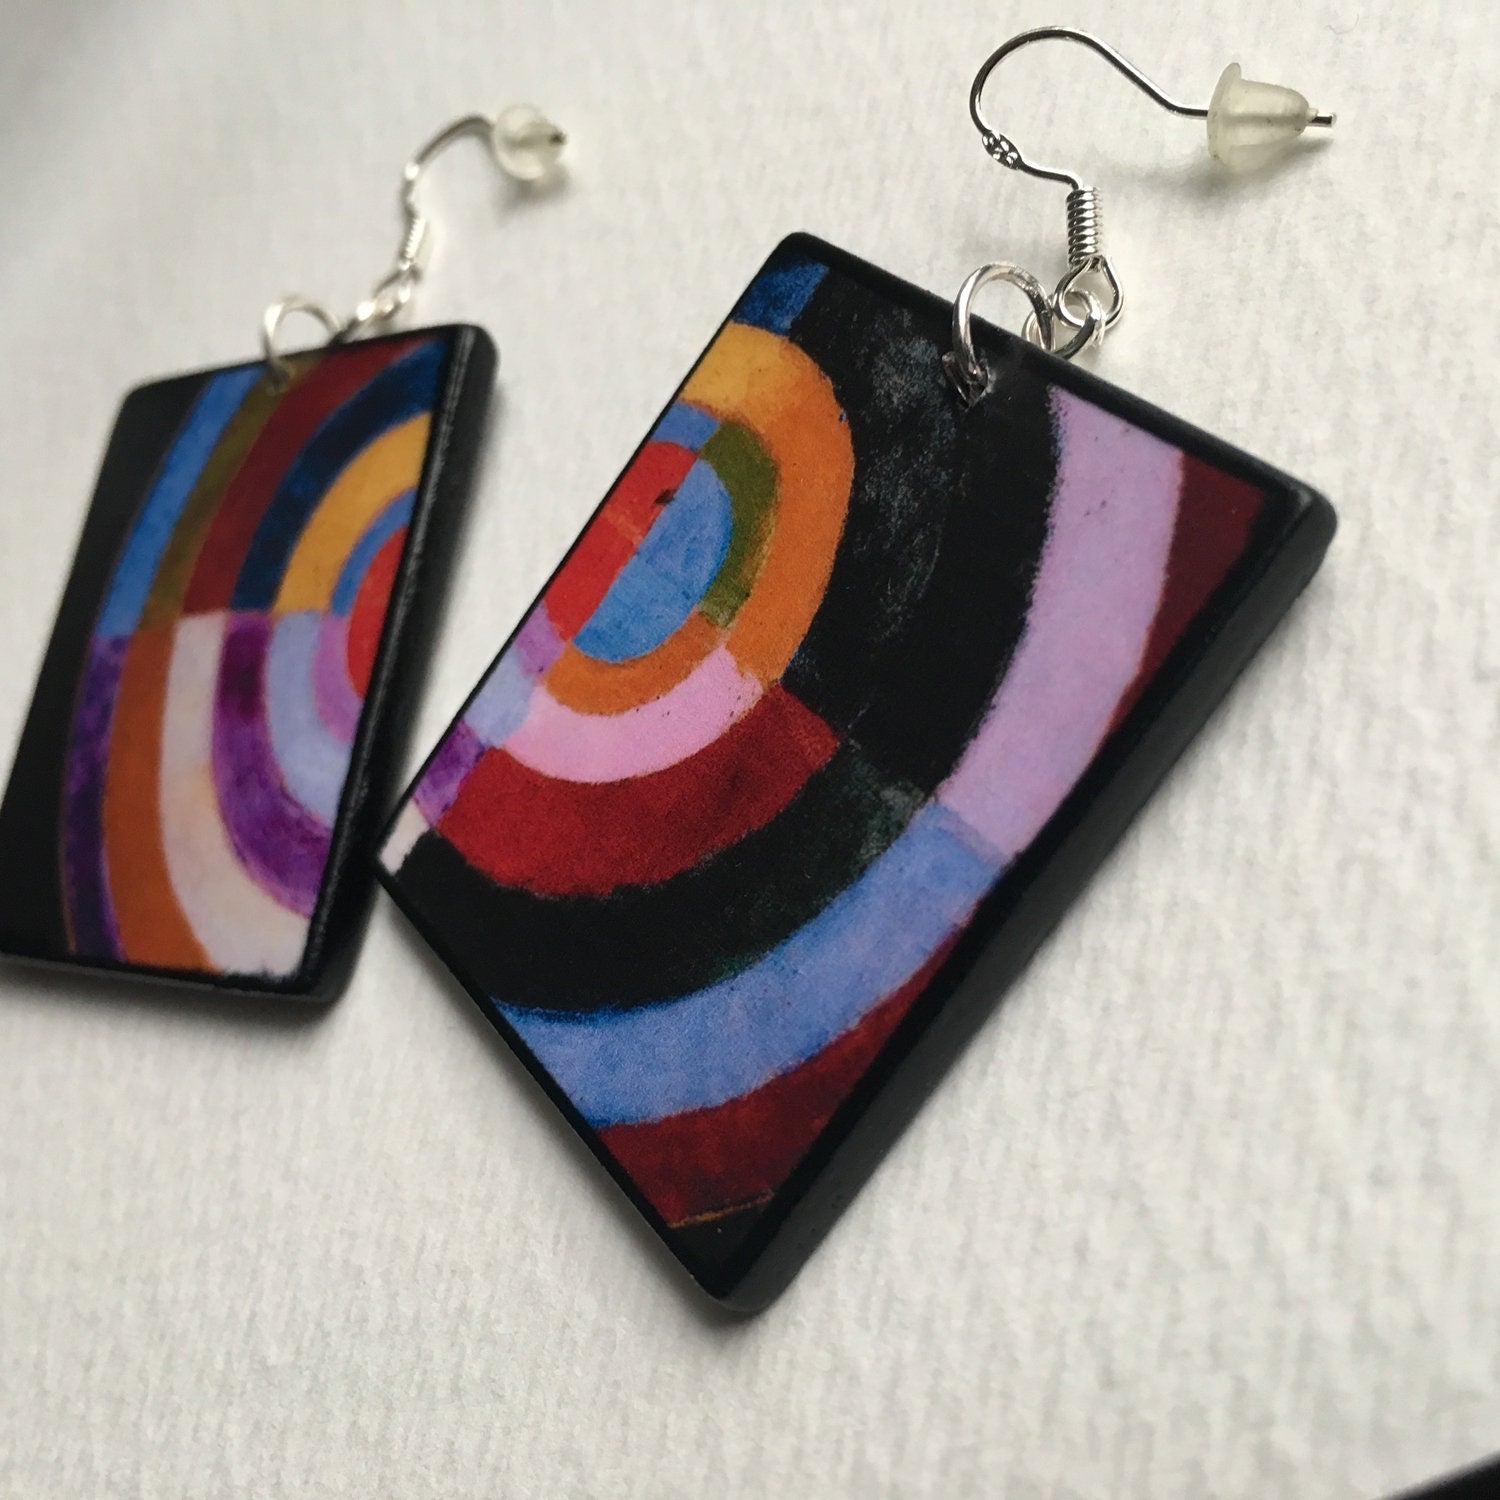 Art earrings by Obljewellery inspired by Robert Delaunay and his painting "Disque Simultane"